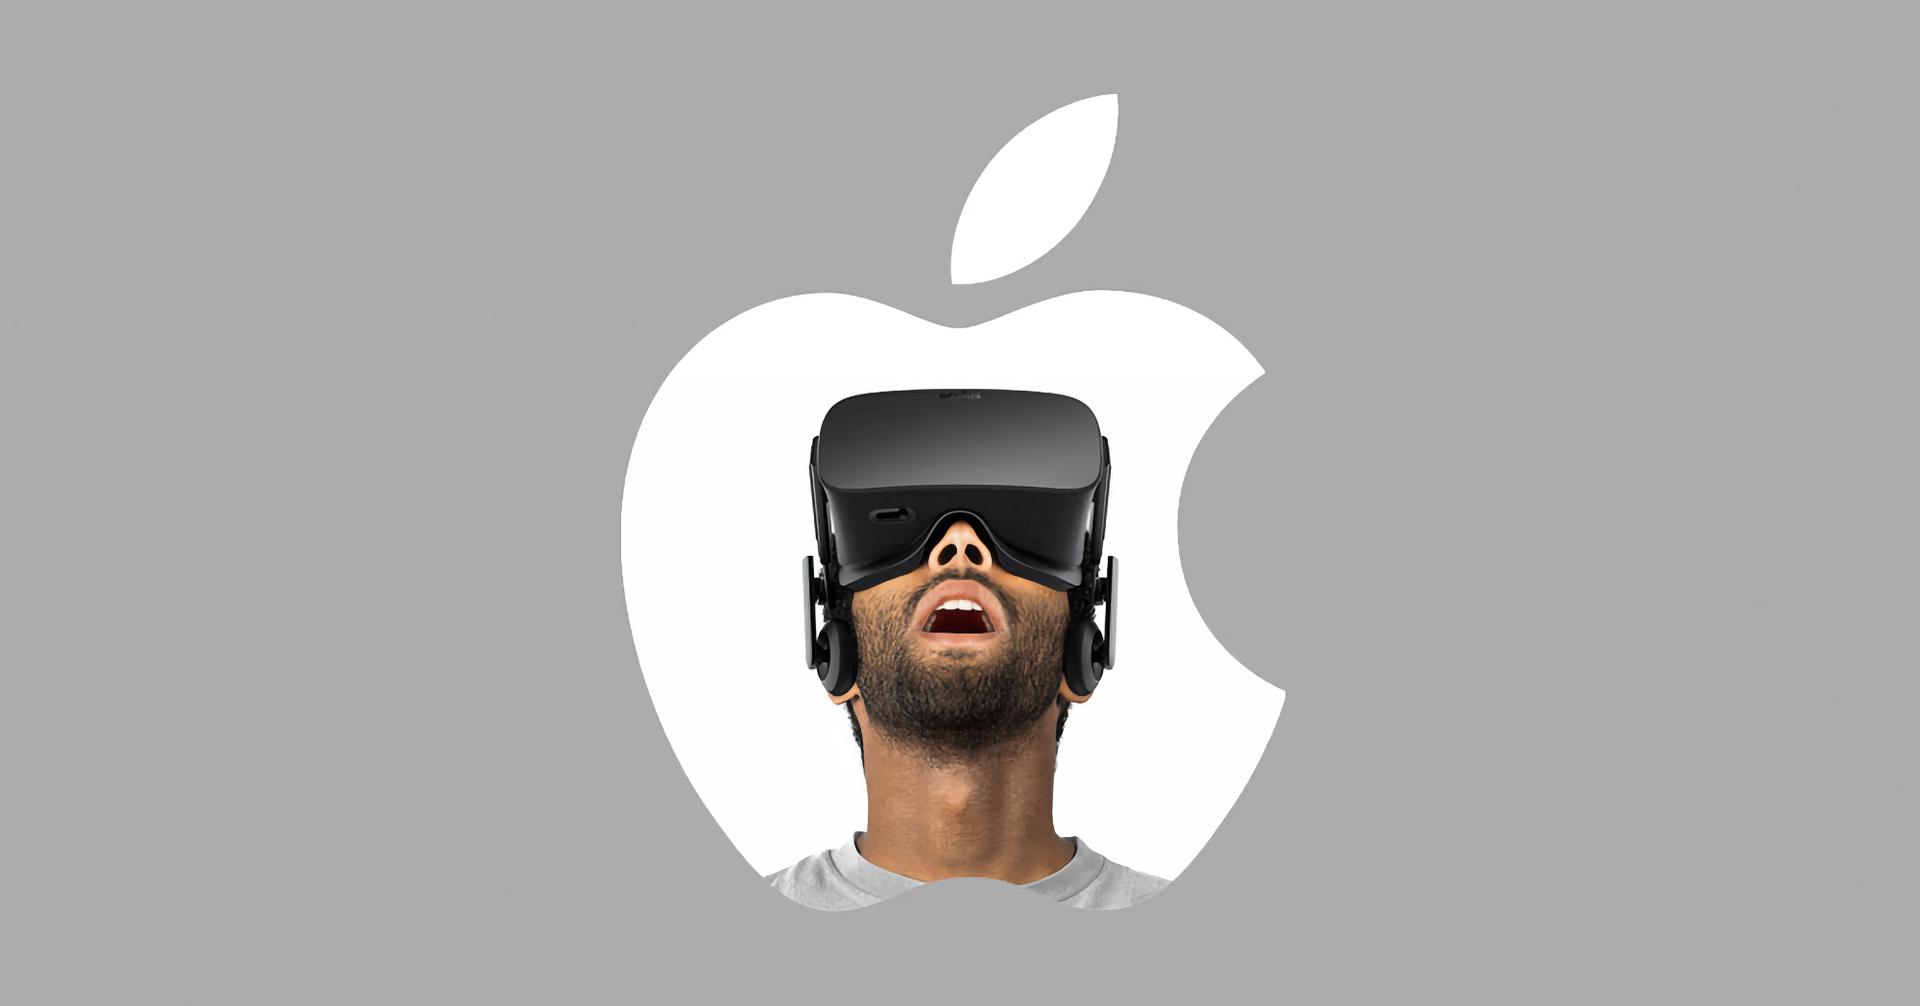 Ming-Chi Kuo: Apple will not present an AR / VR helmet at WWDC 2022